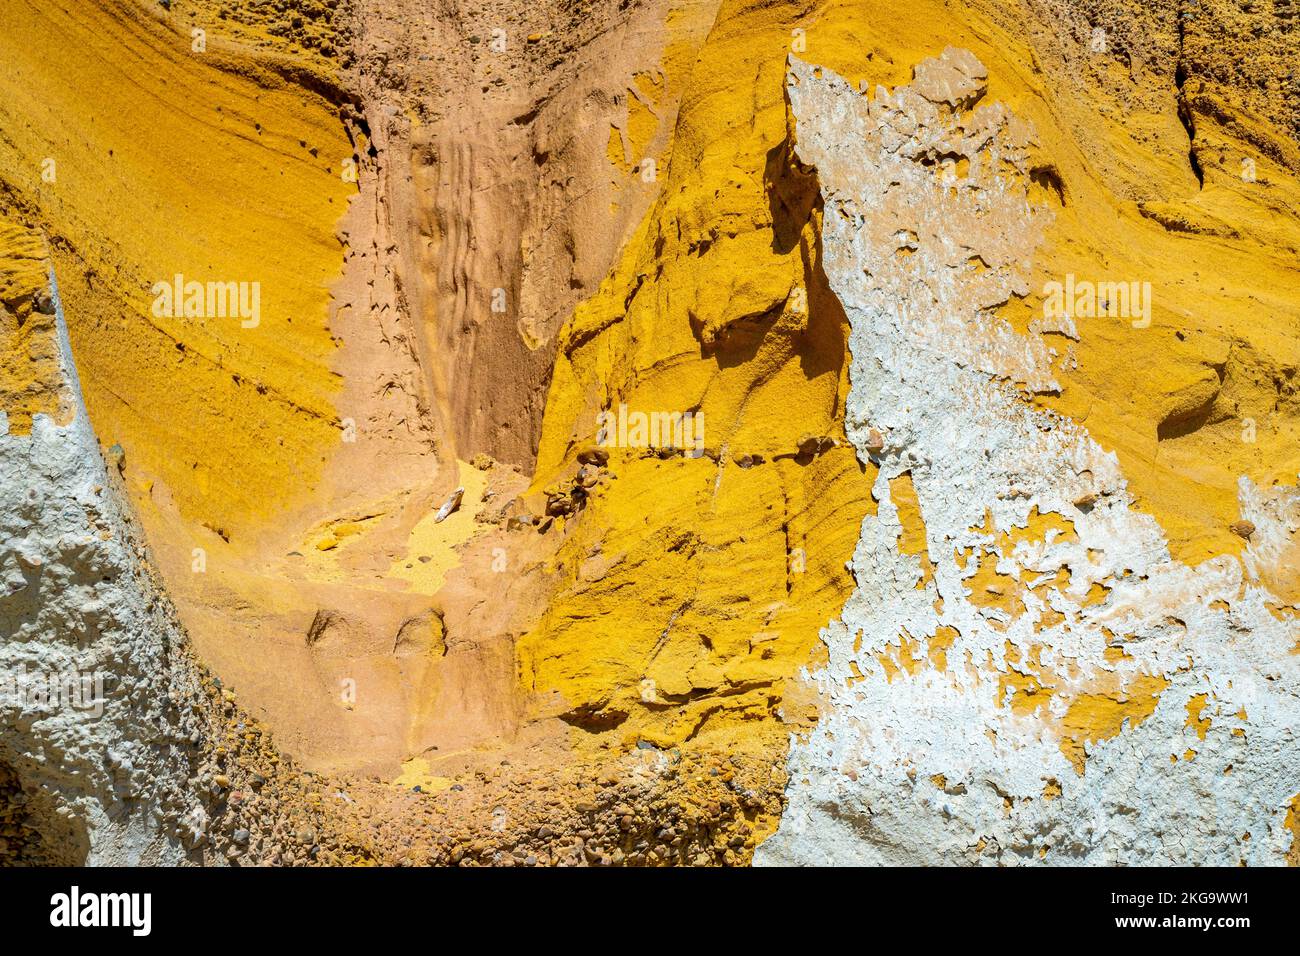 Multicolored yellow, mustard, honey colored colourful colorful rock slope texture weathering and erosion, patterns and textures of rock formation Stock Photo